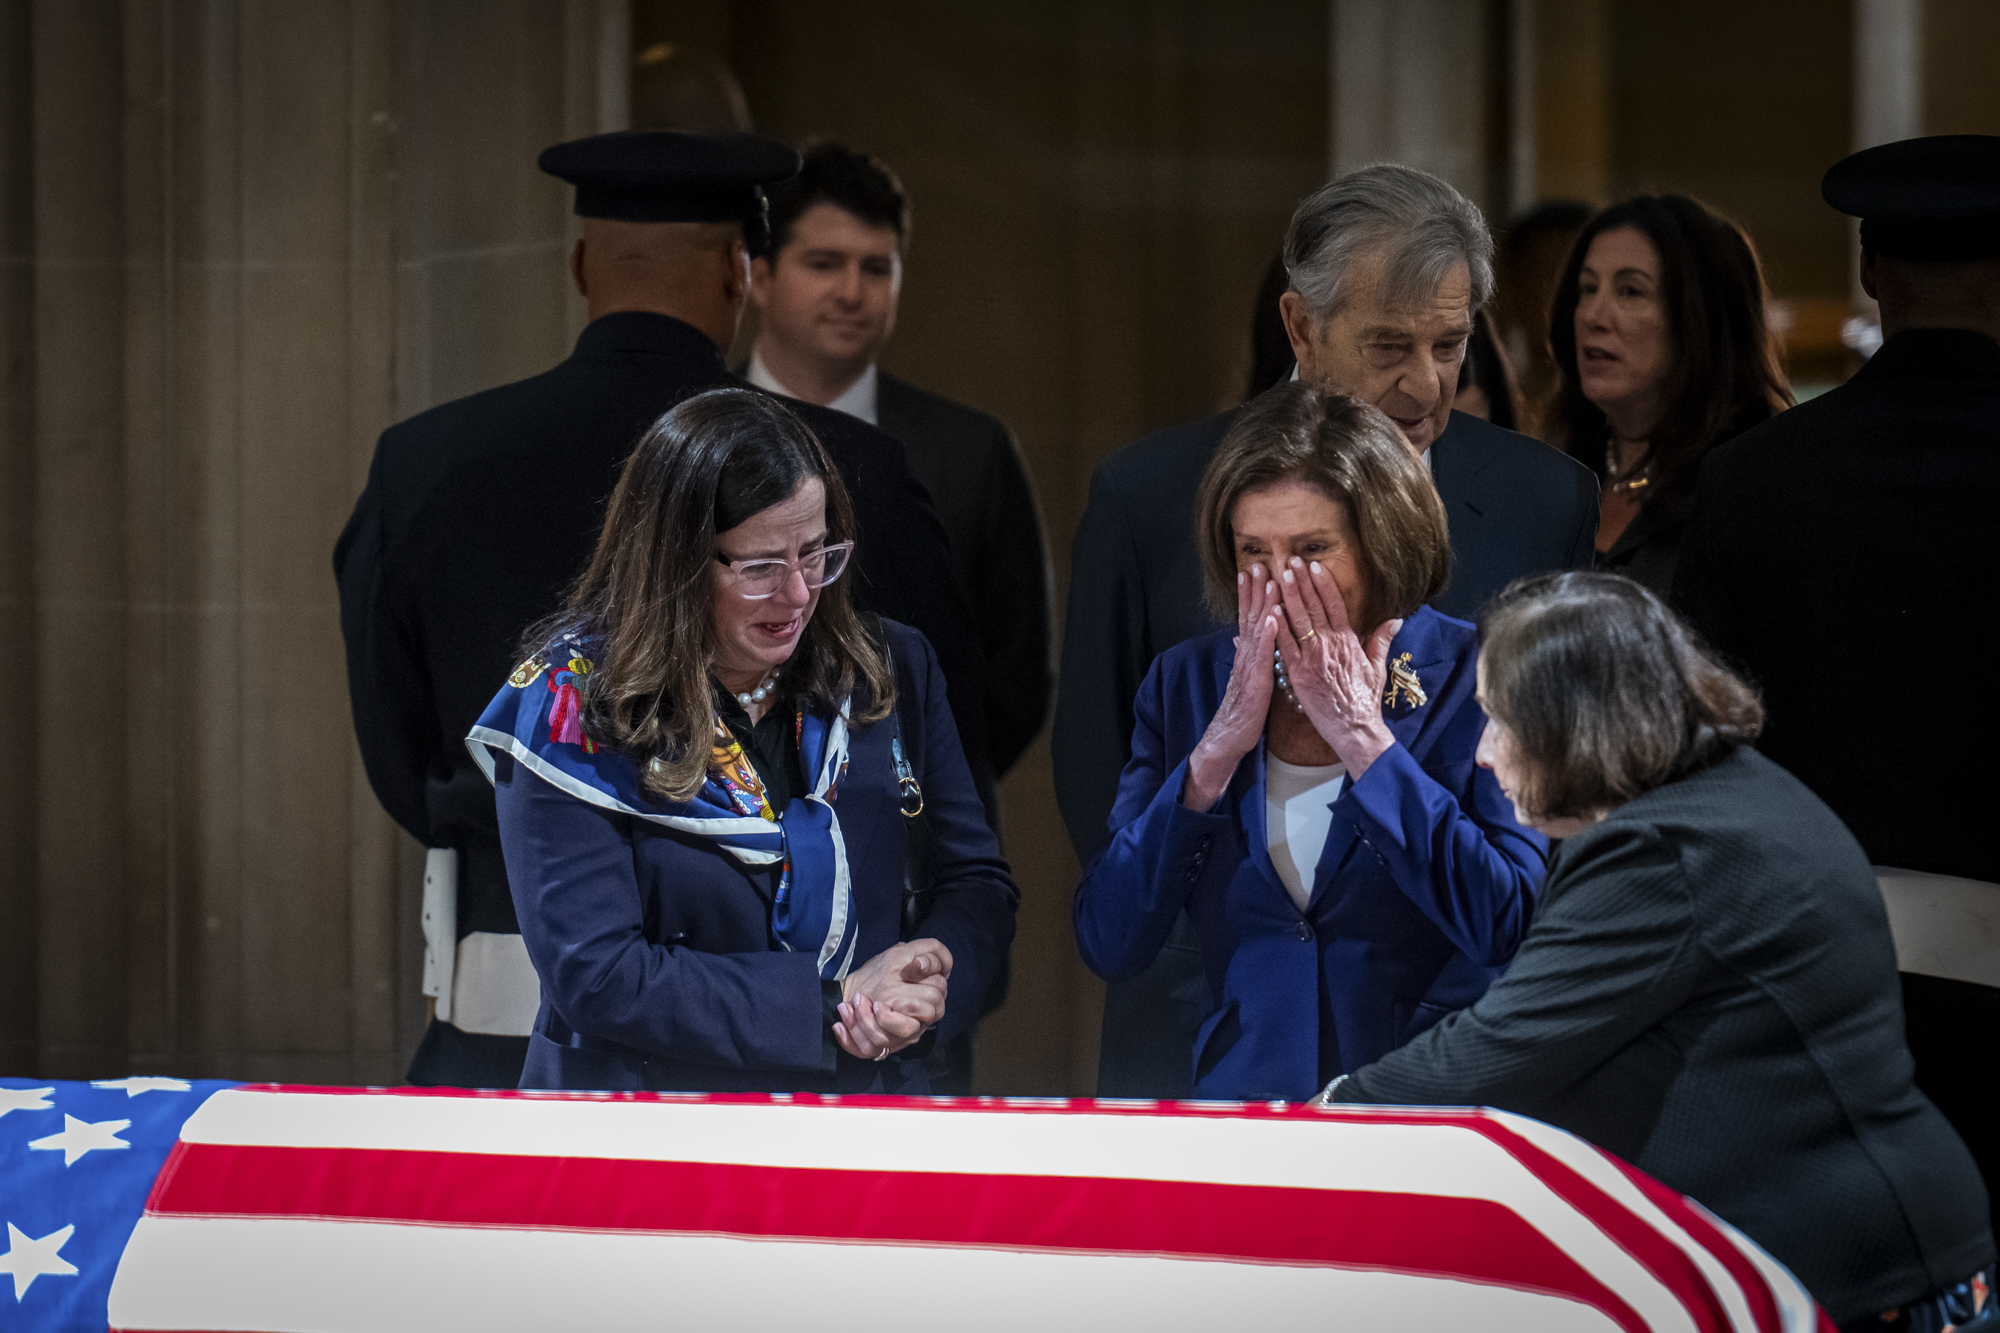 A person with long hair cries in front of a casket draped in an American flag.